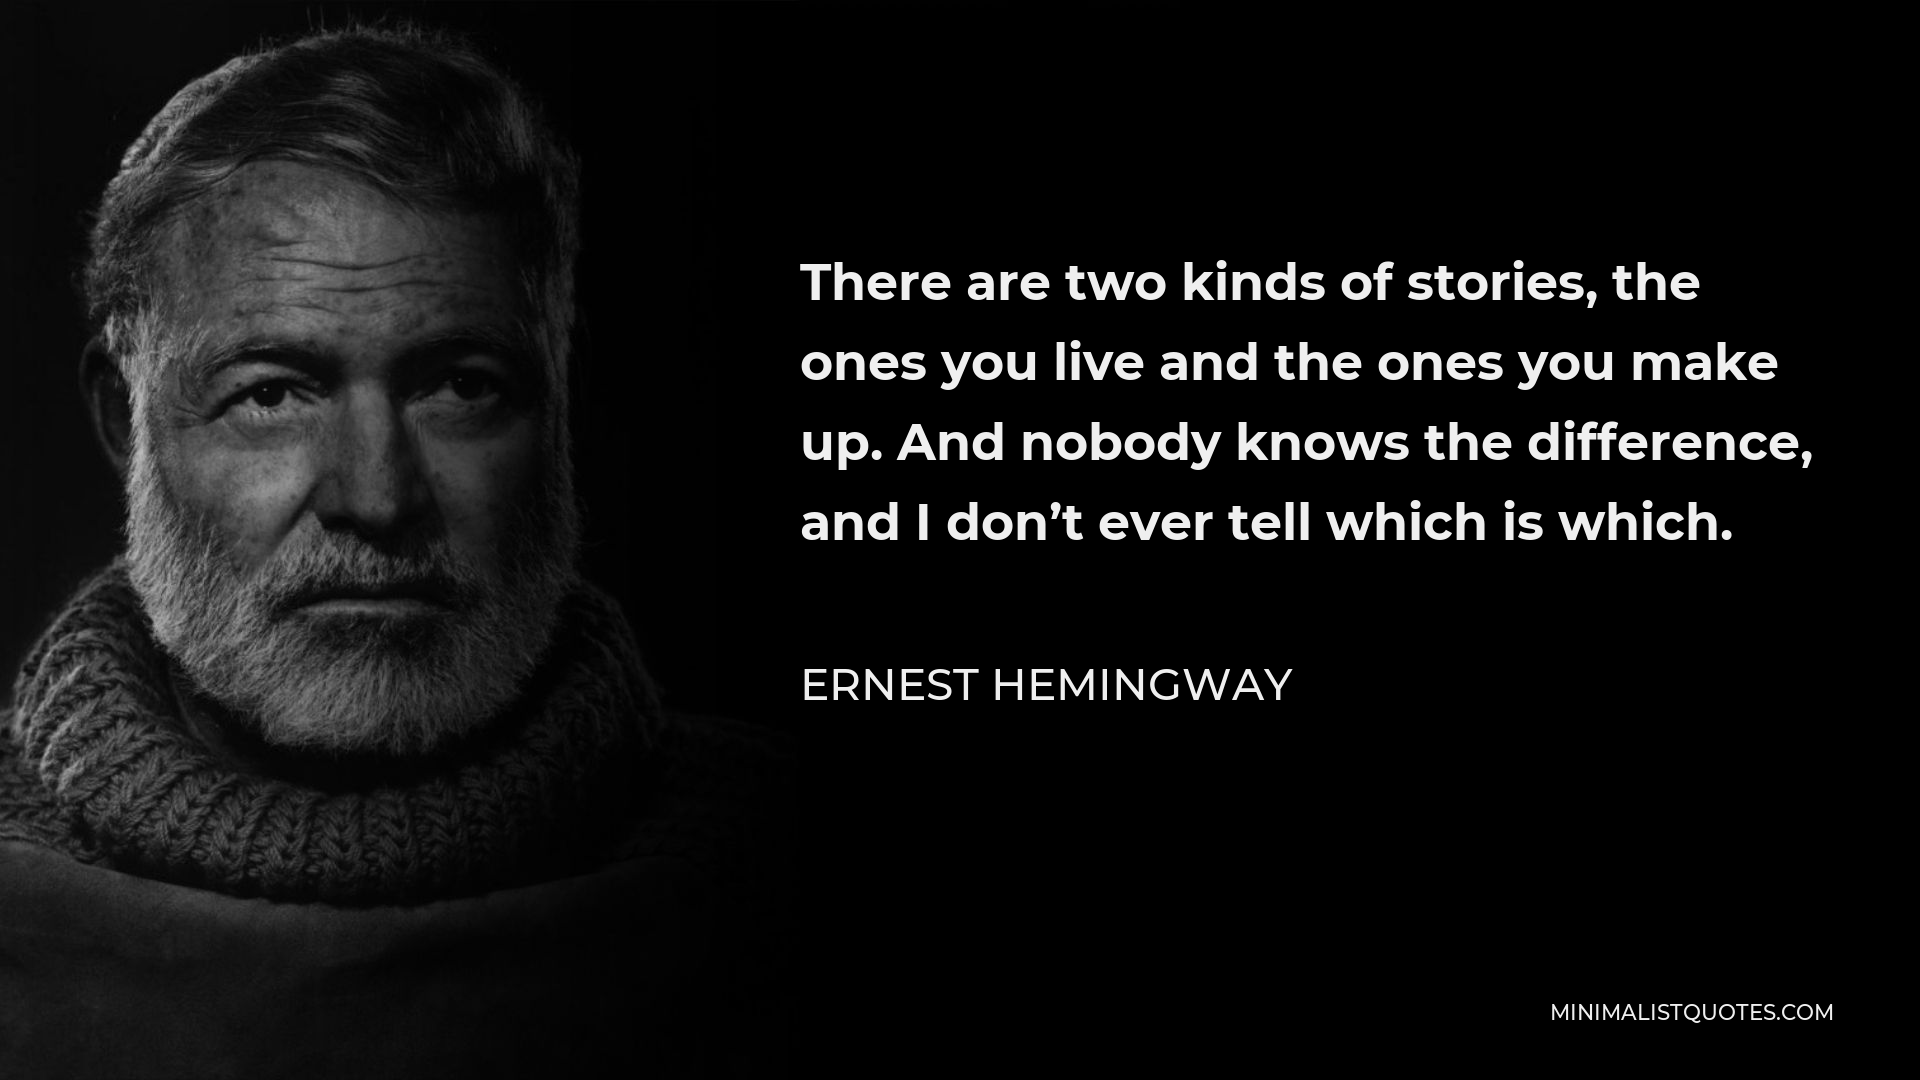 Ernest Hemingway Quote - There are two kinds of stories, the ones you live and the ones you make up. And nobody knows the difference, and I don’t ever tell which is which.